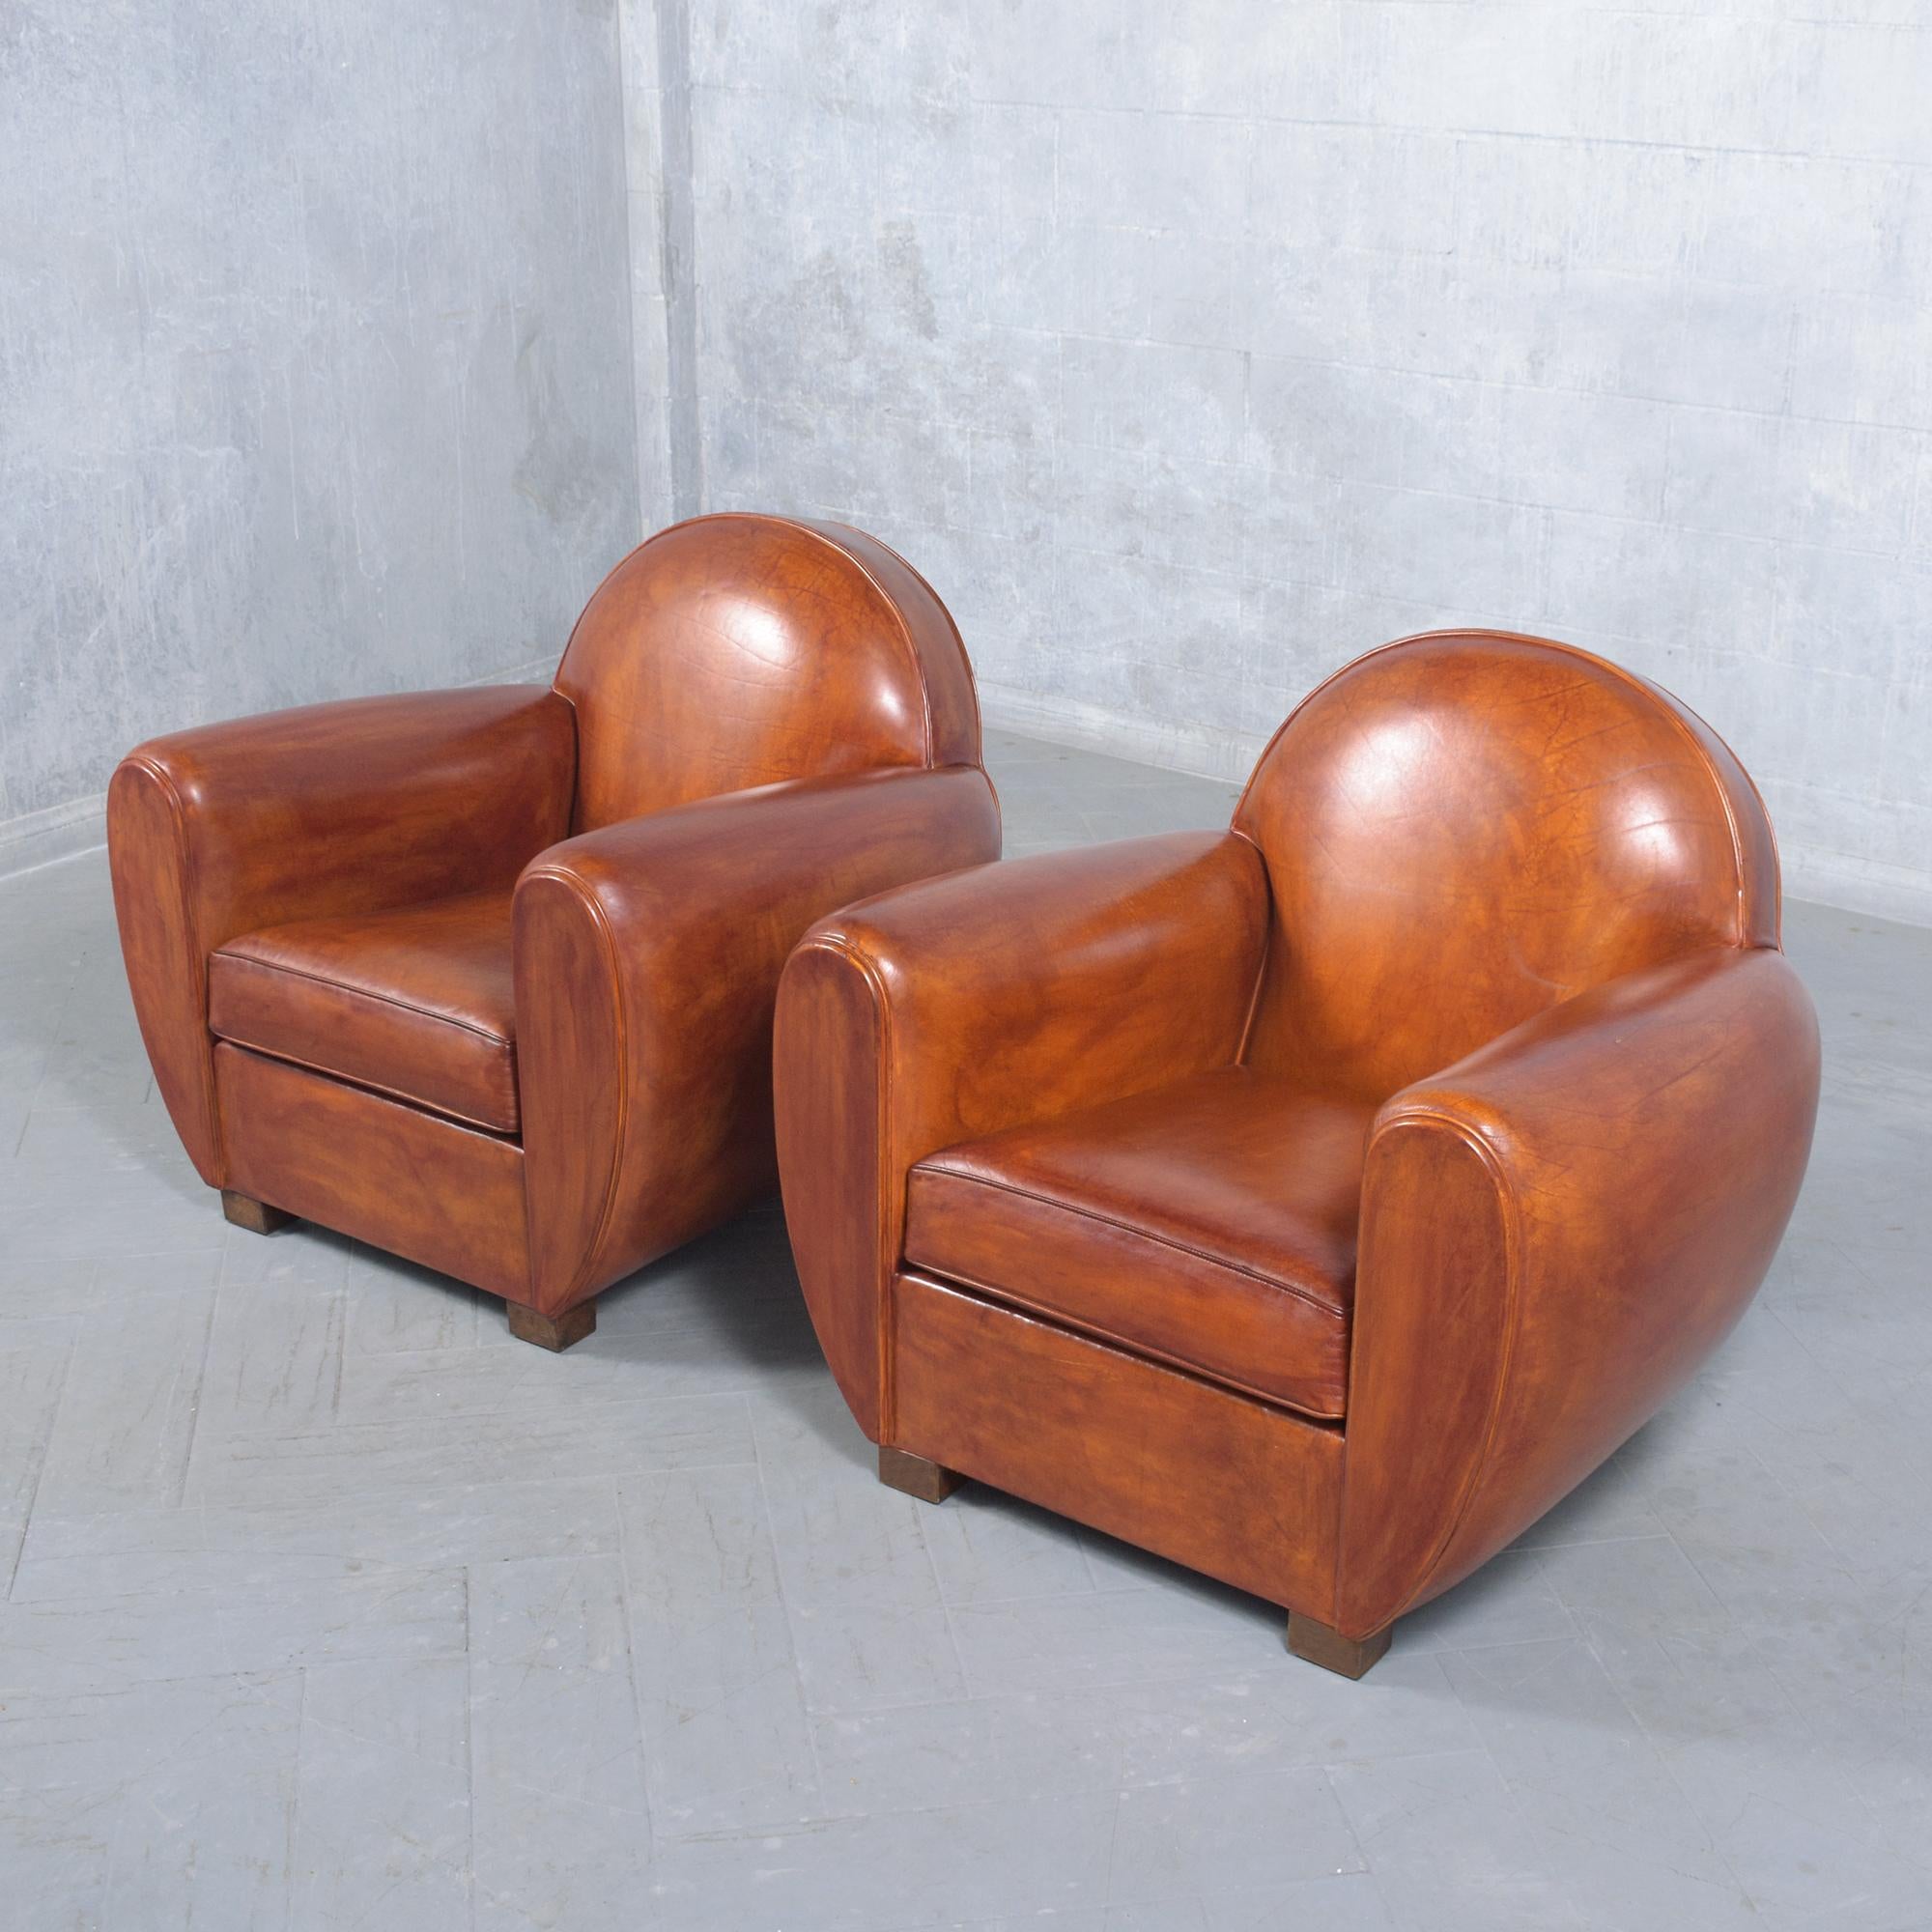 Mid-20th Century Restored Art Deco Club Chairs: 1960s French Deco Elegance